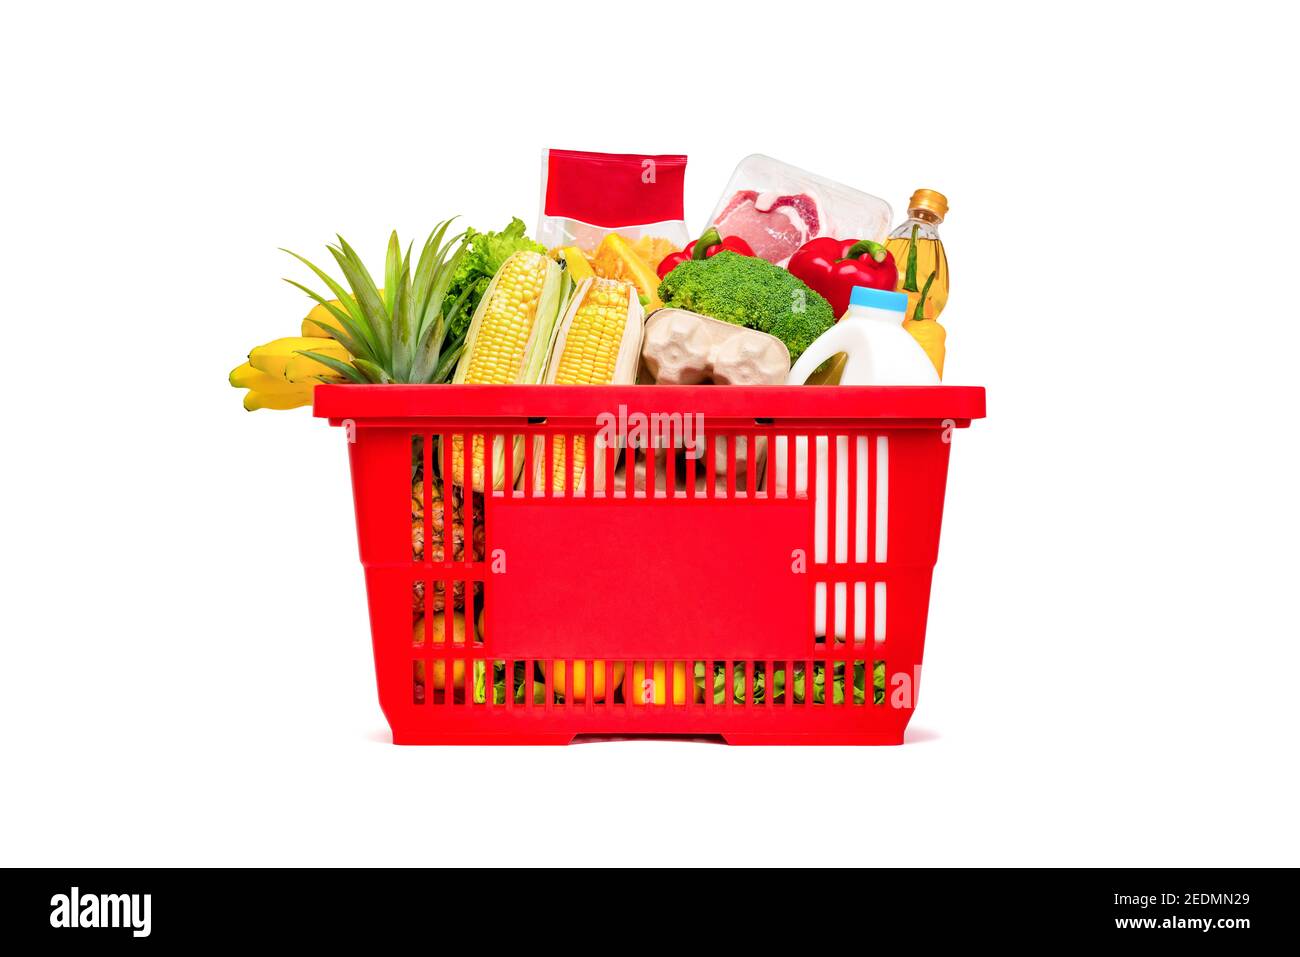 Red shopping basket full of food and groceries, studio shot isolated on white background Stock Photo